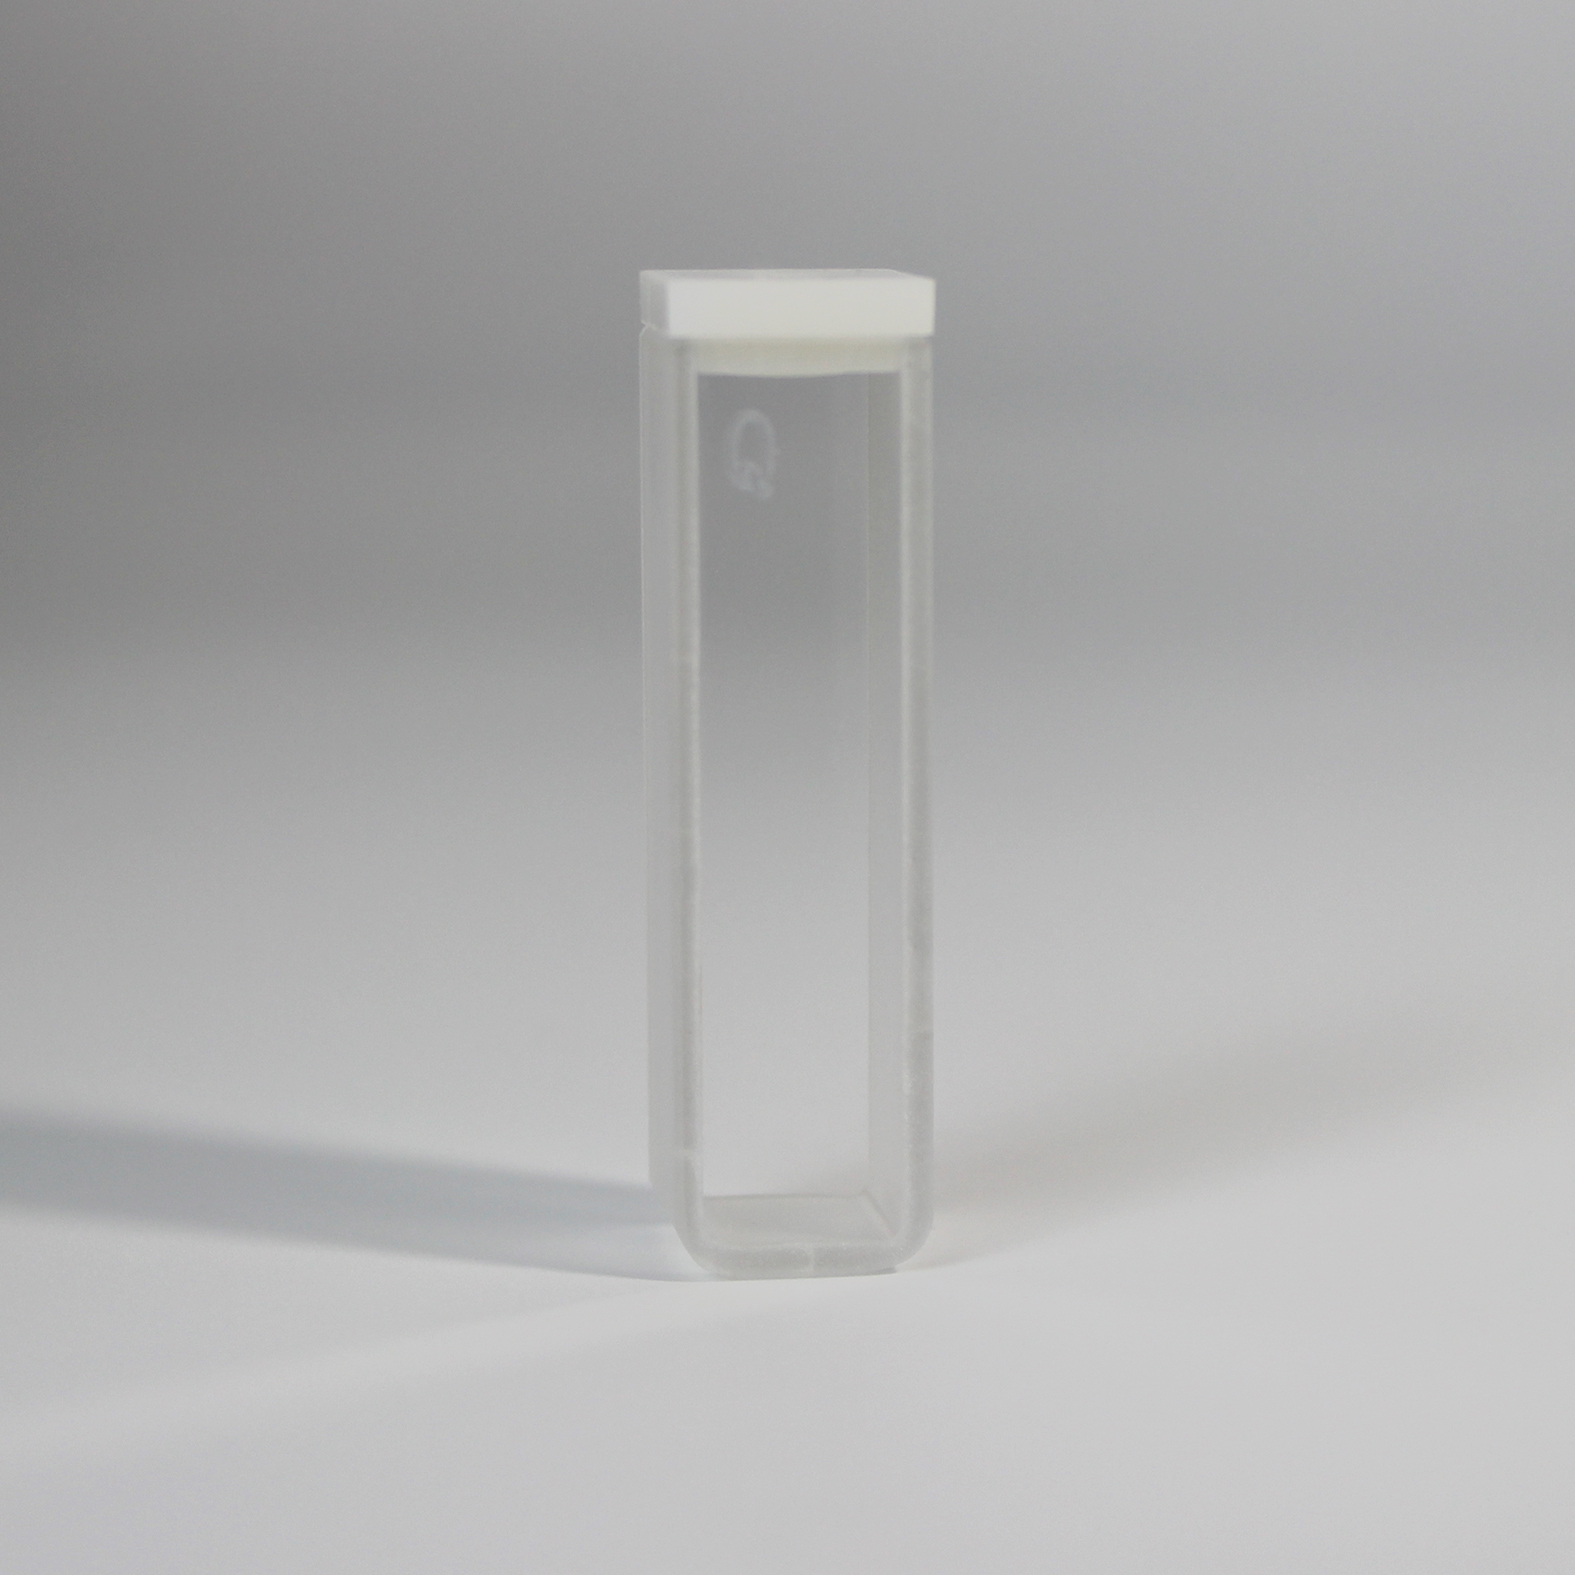 Chinese Manufacturer High Quality Laboratory Standard Quartz Glass Cuvettes for Spectrophotometers